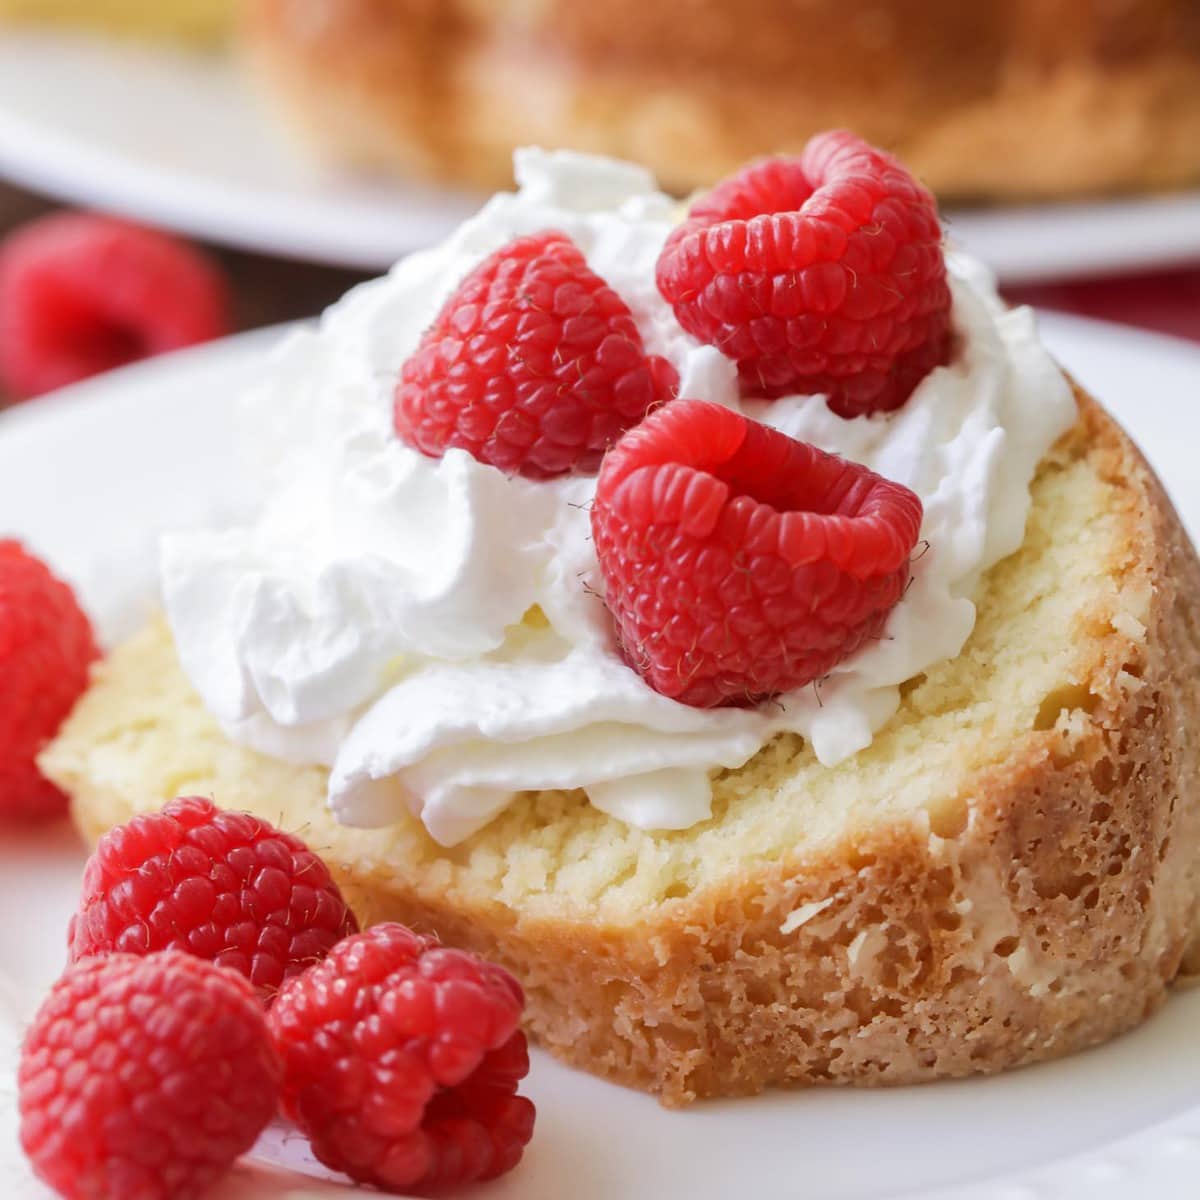 Holiday cakes - cream cheese pound cake topped with fresh raspberries.